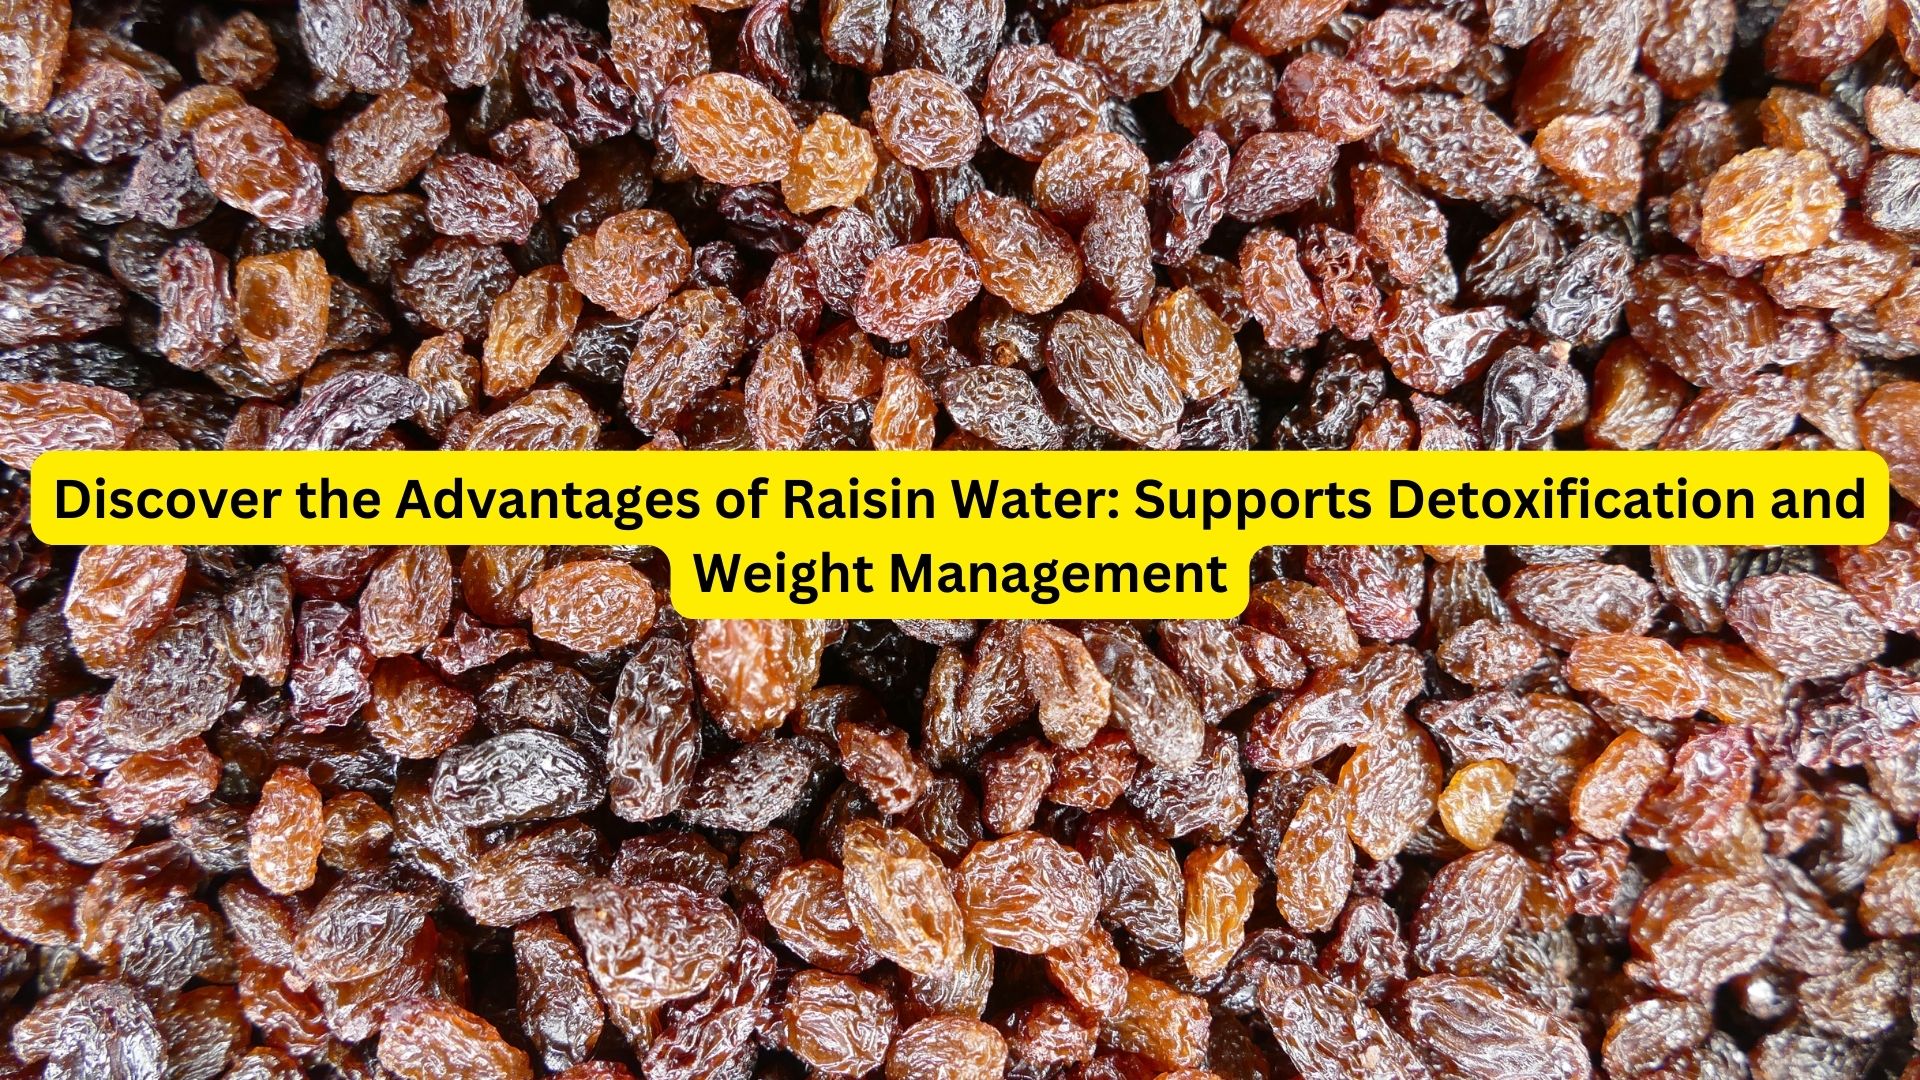 Discover the Advantages of Raisin Water: Supports Detoxification and Weight Management